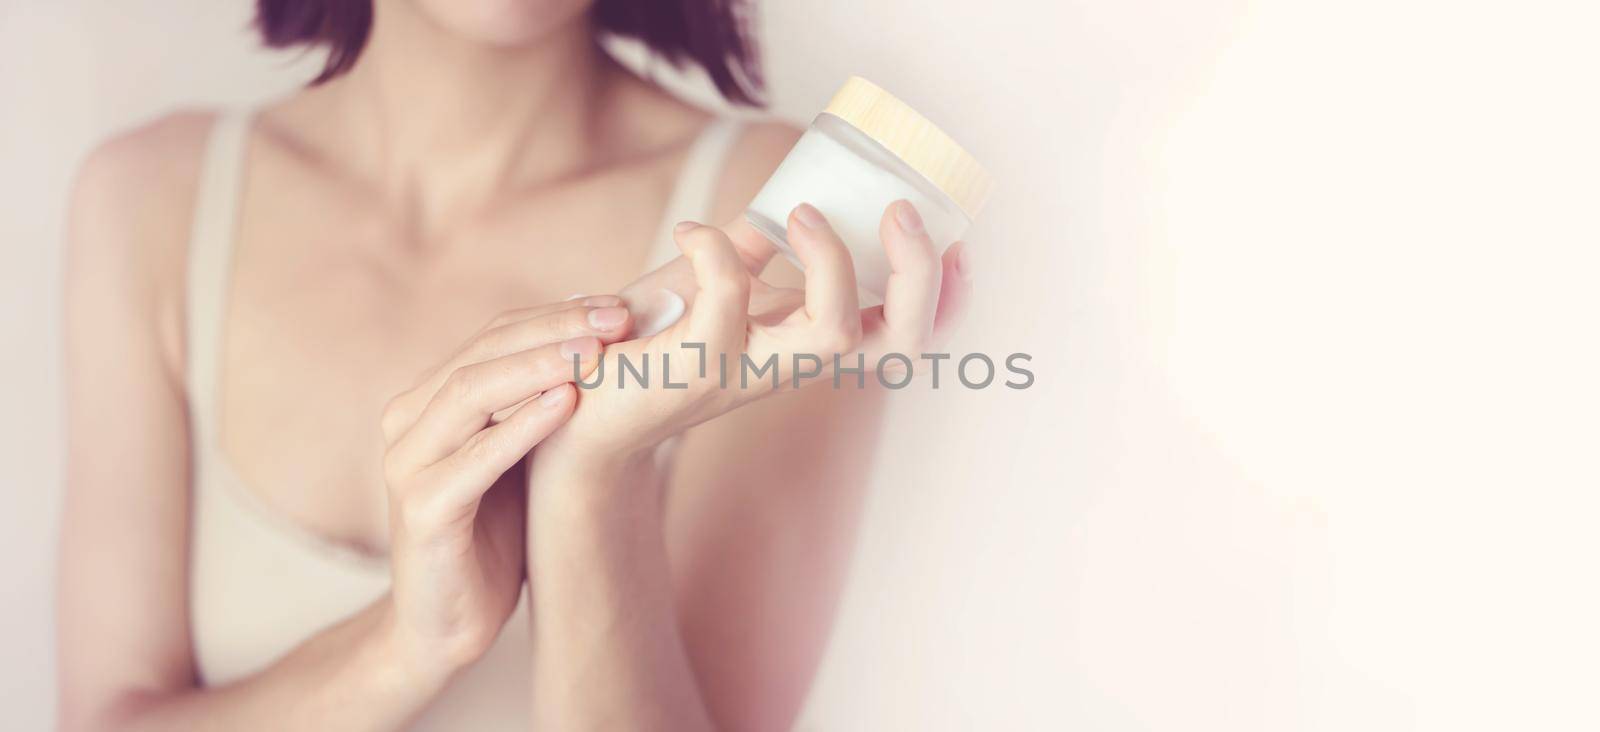 Female hands hold a jar of moisturizing cream by africapink